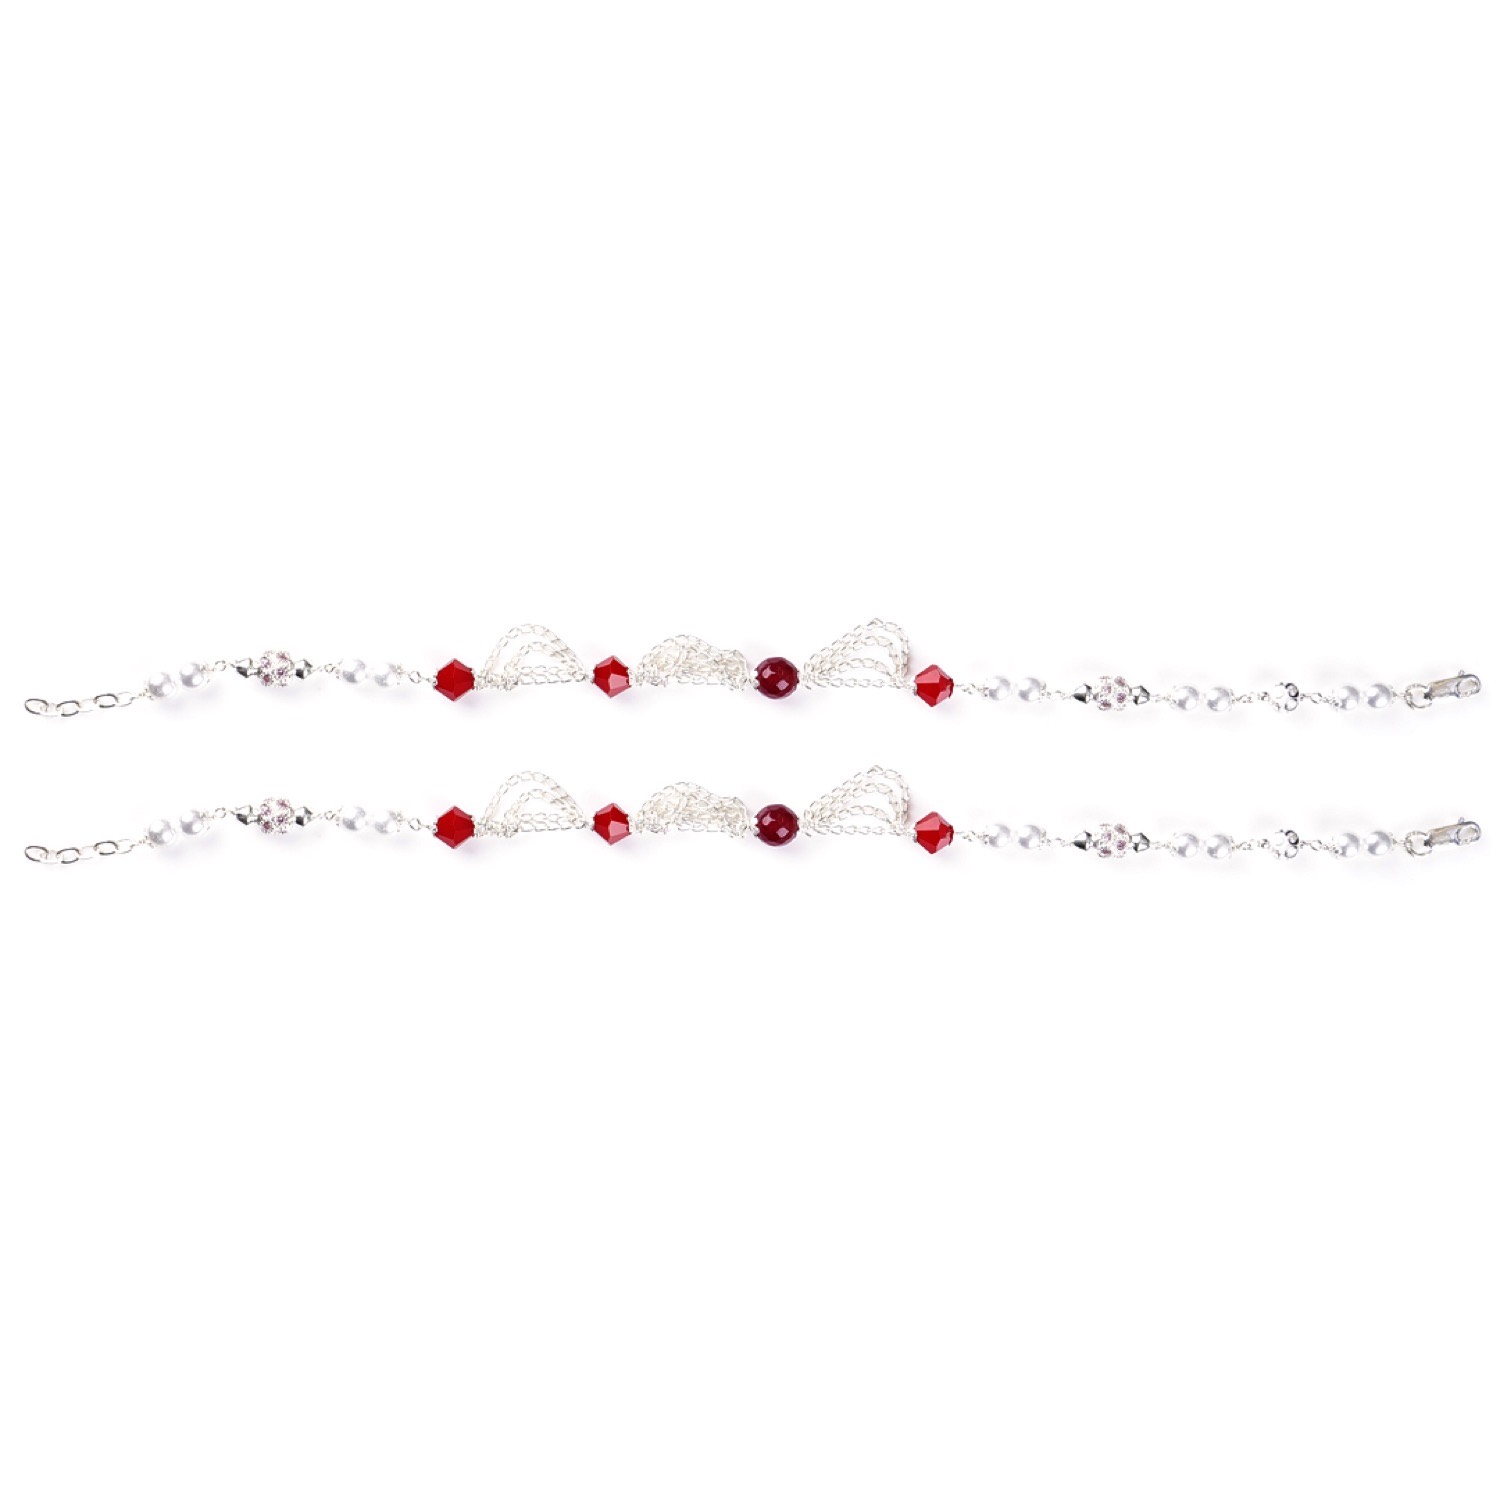 varam_anklets_072022_red_and_white_stone_silver_anklets_3-1